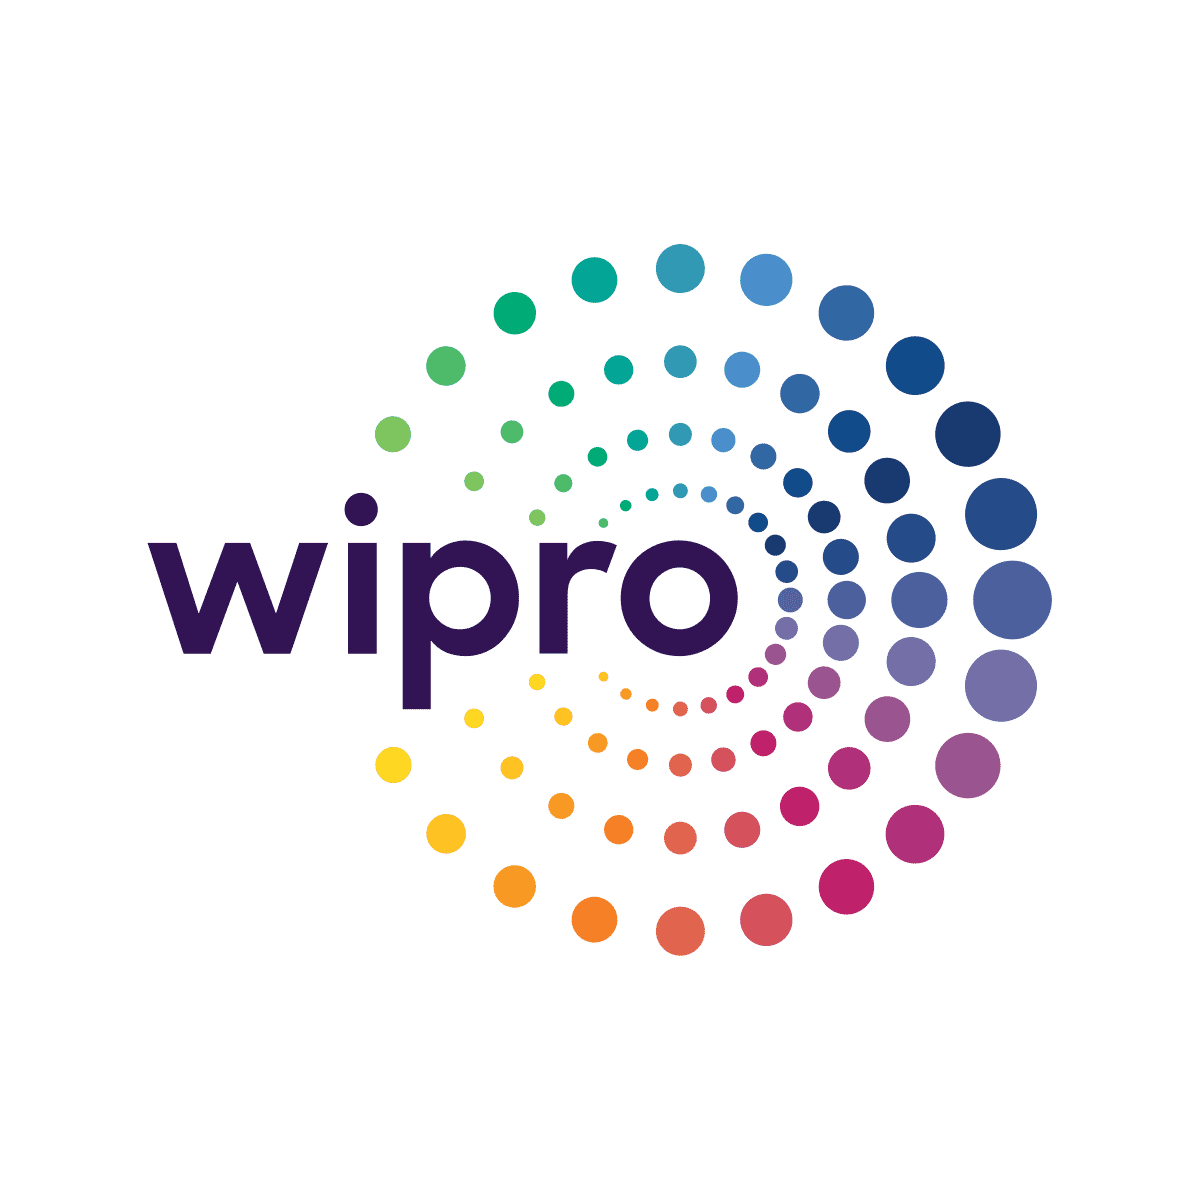 The logo for Wipro